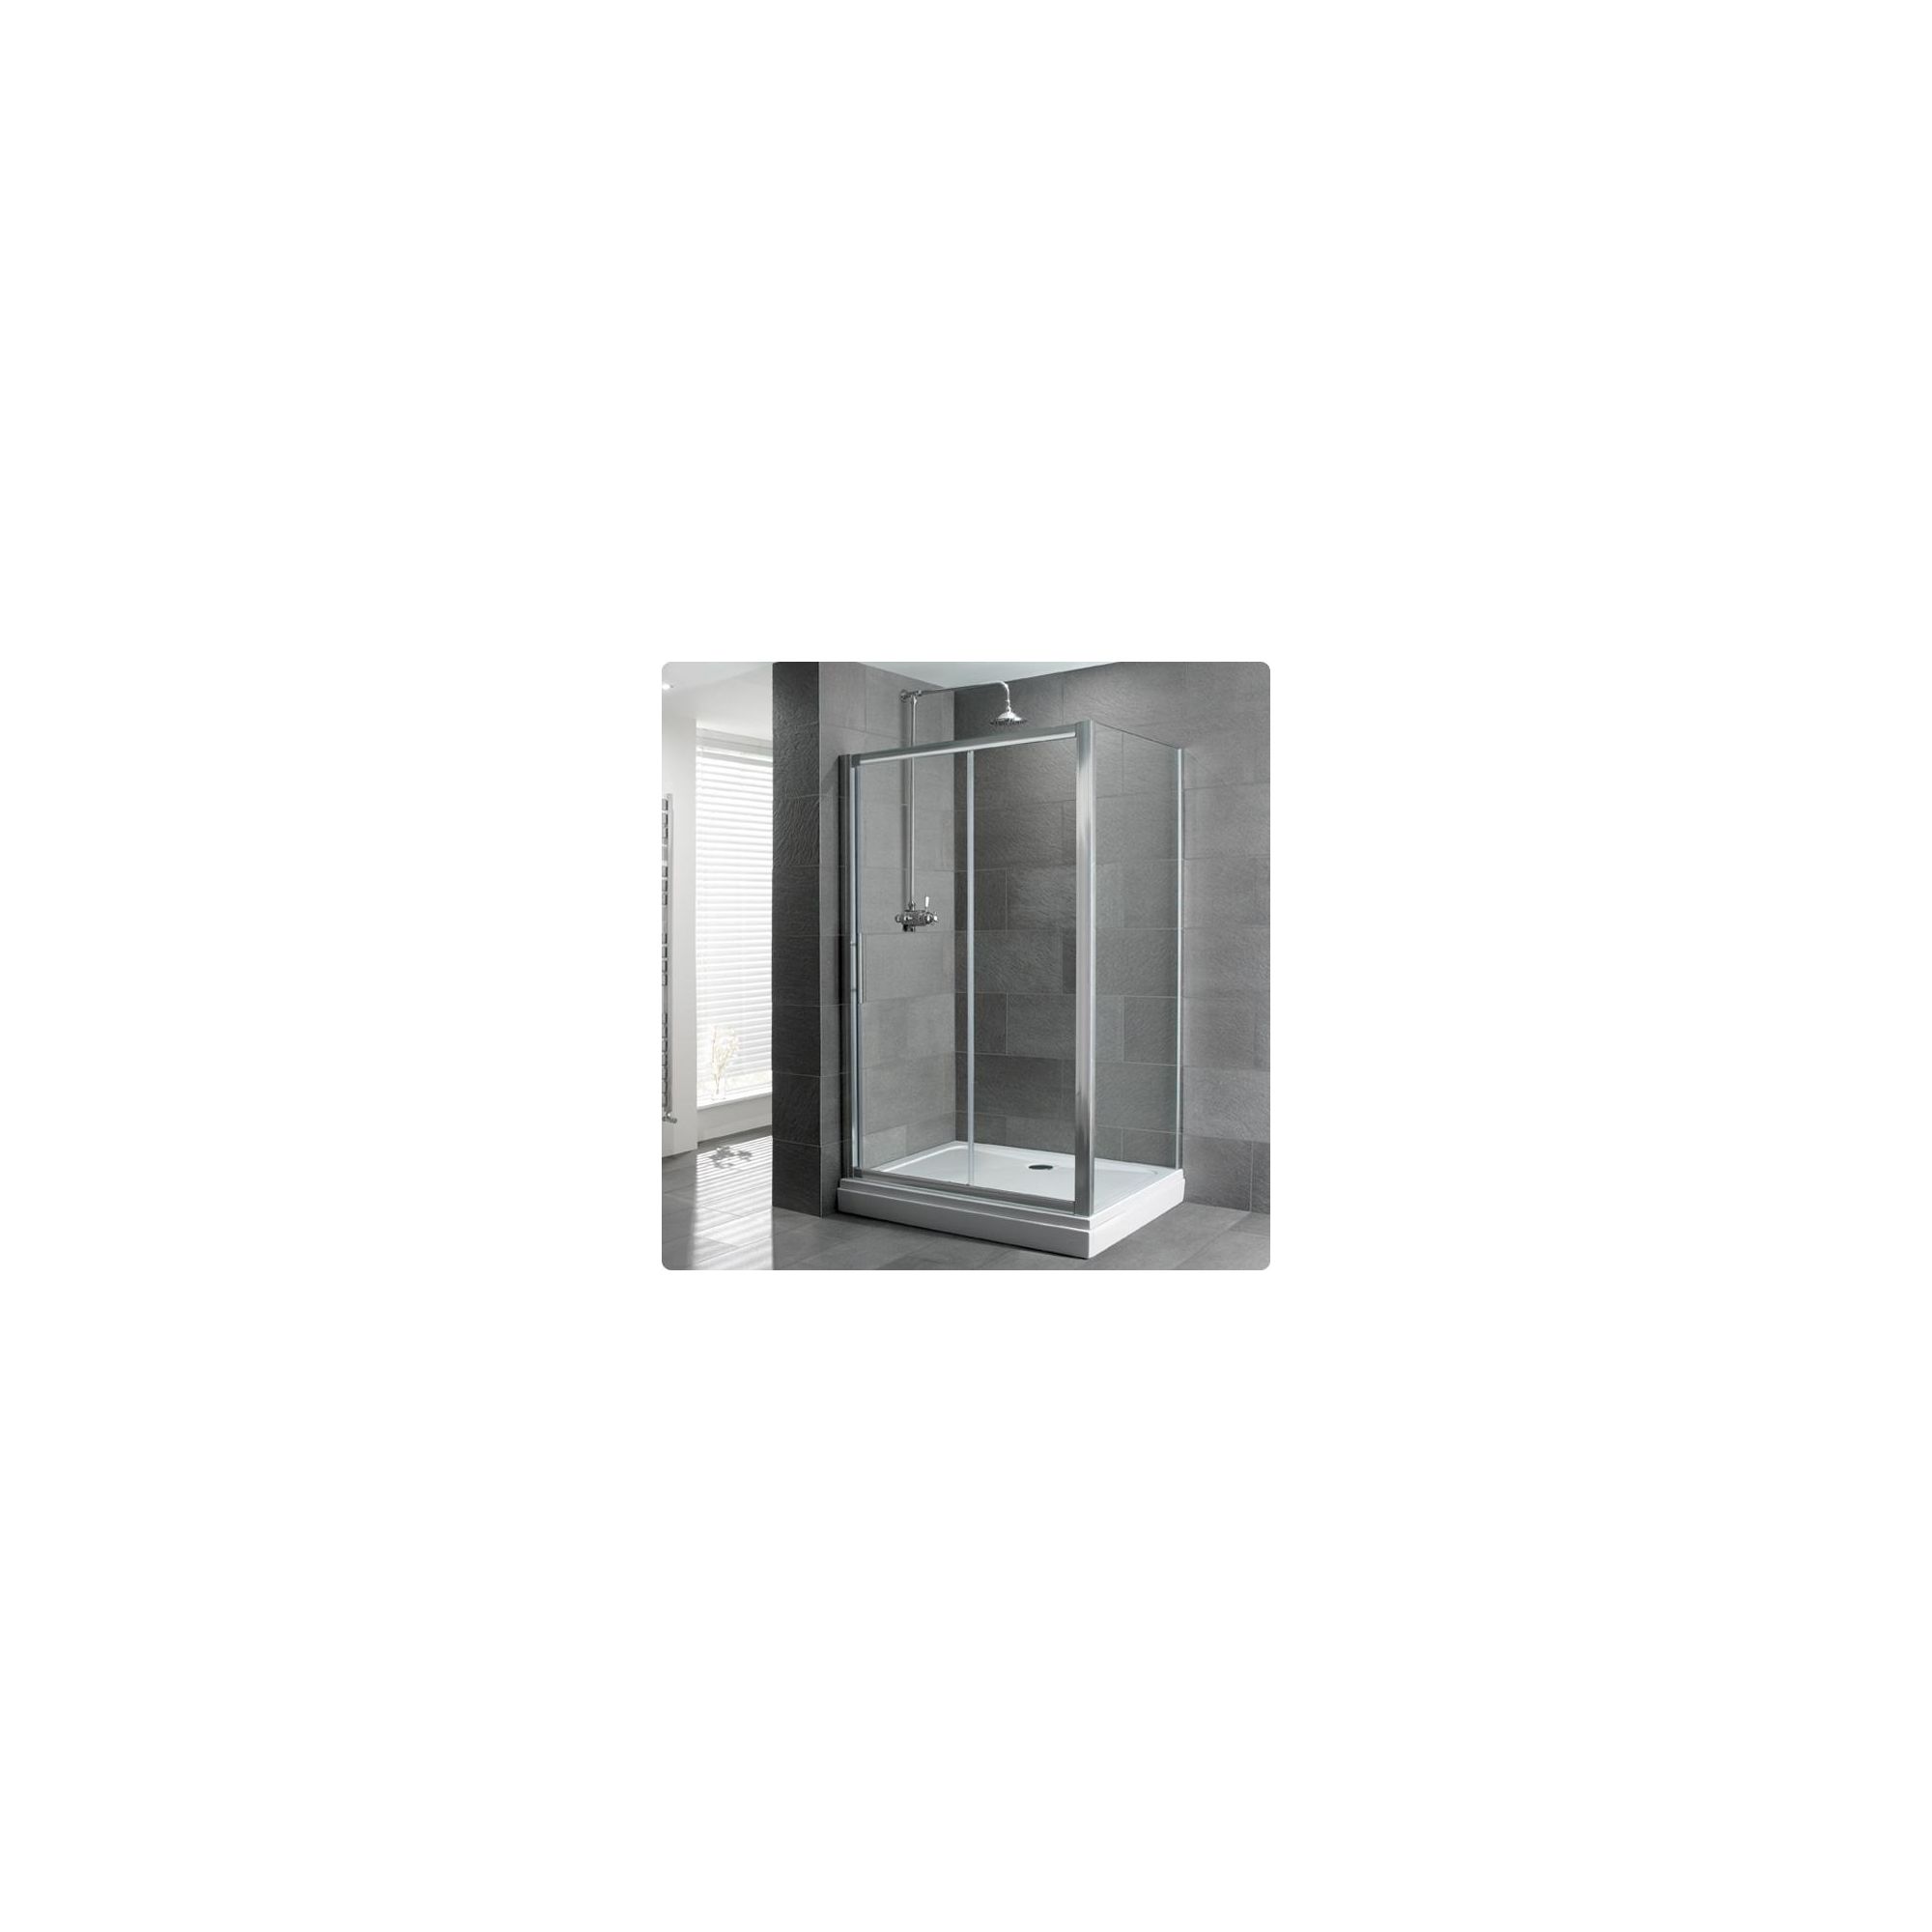 Duchy Select Silver Single Sliding Door Shower Enclosure, 1100mm x 700mm, Standard Tray, 6mm Glass at Tesco Direct